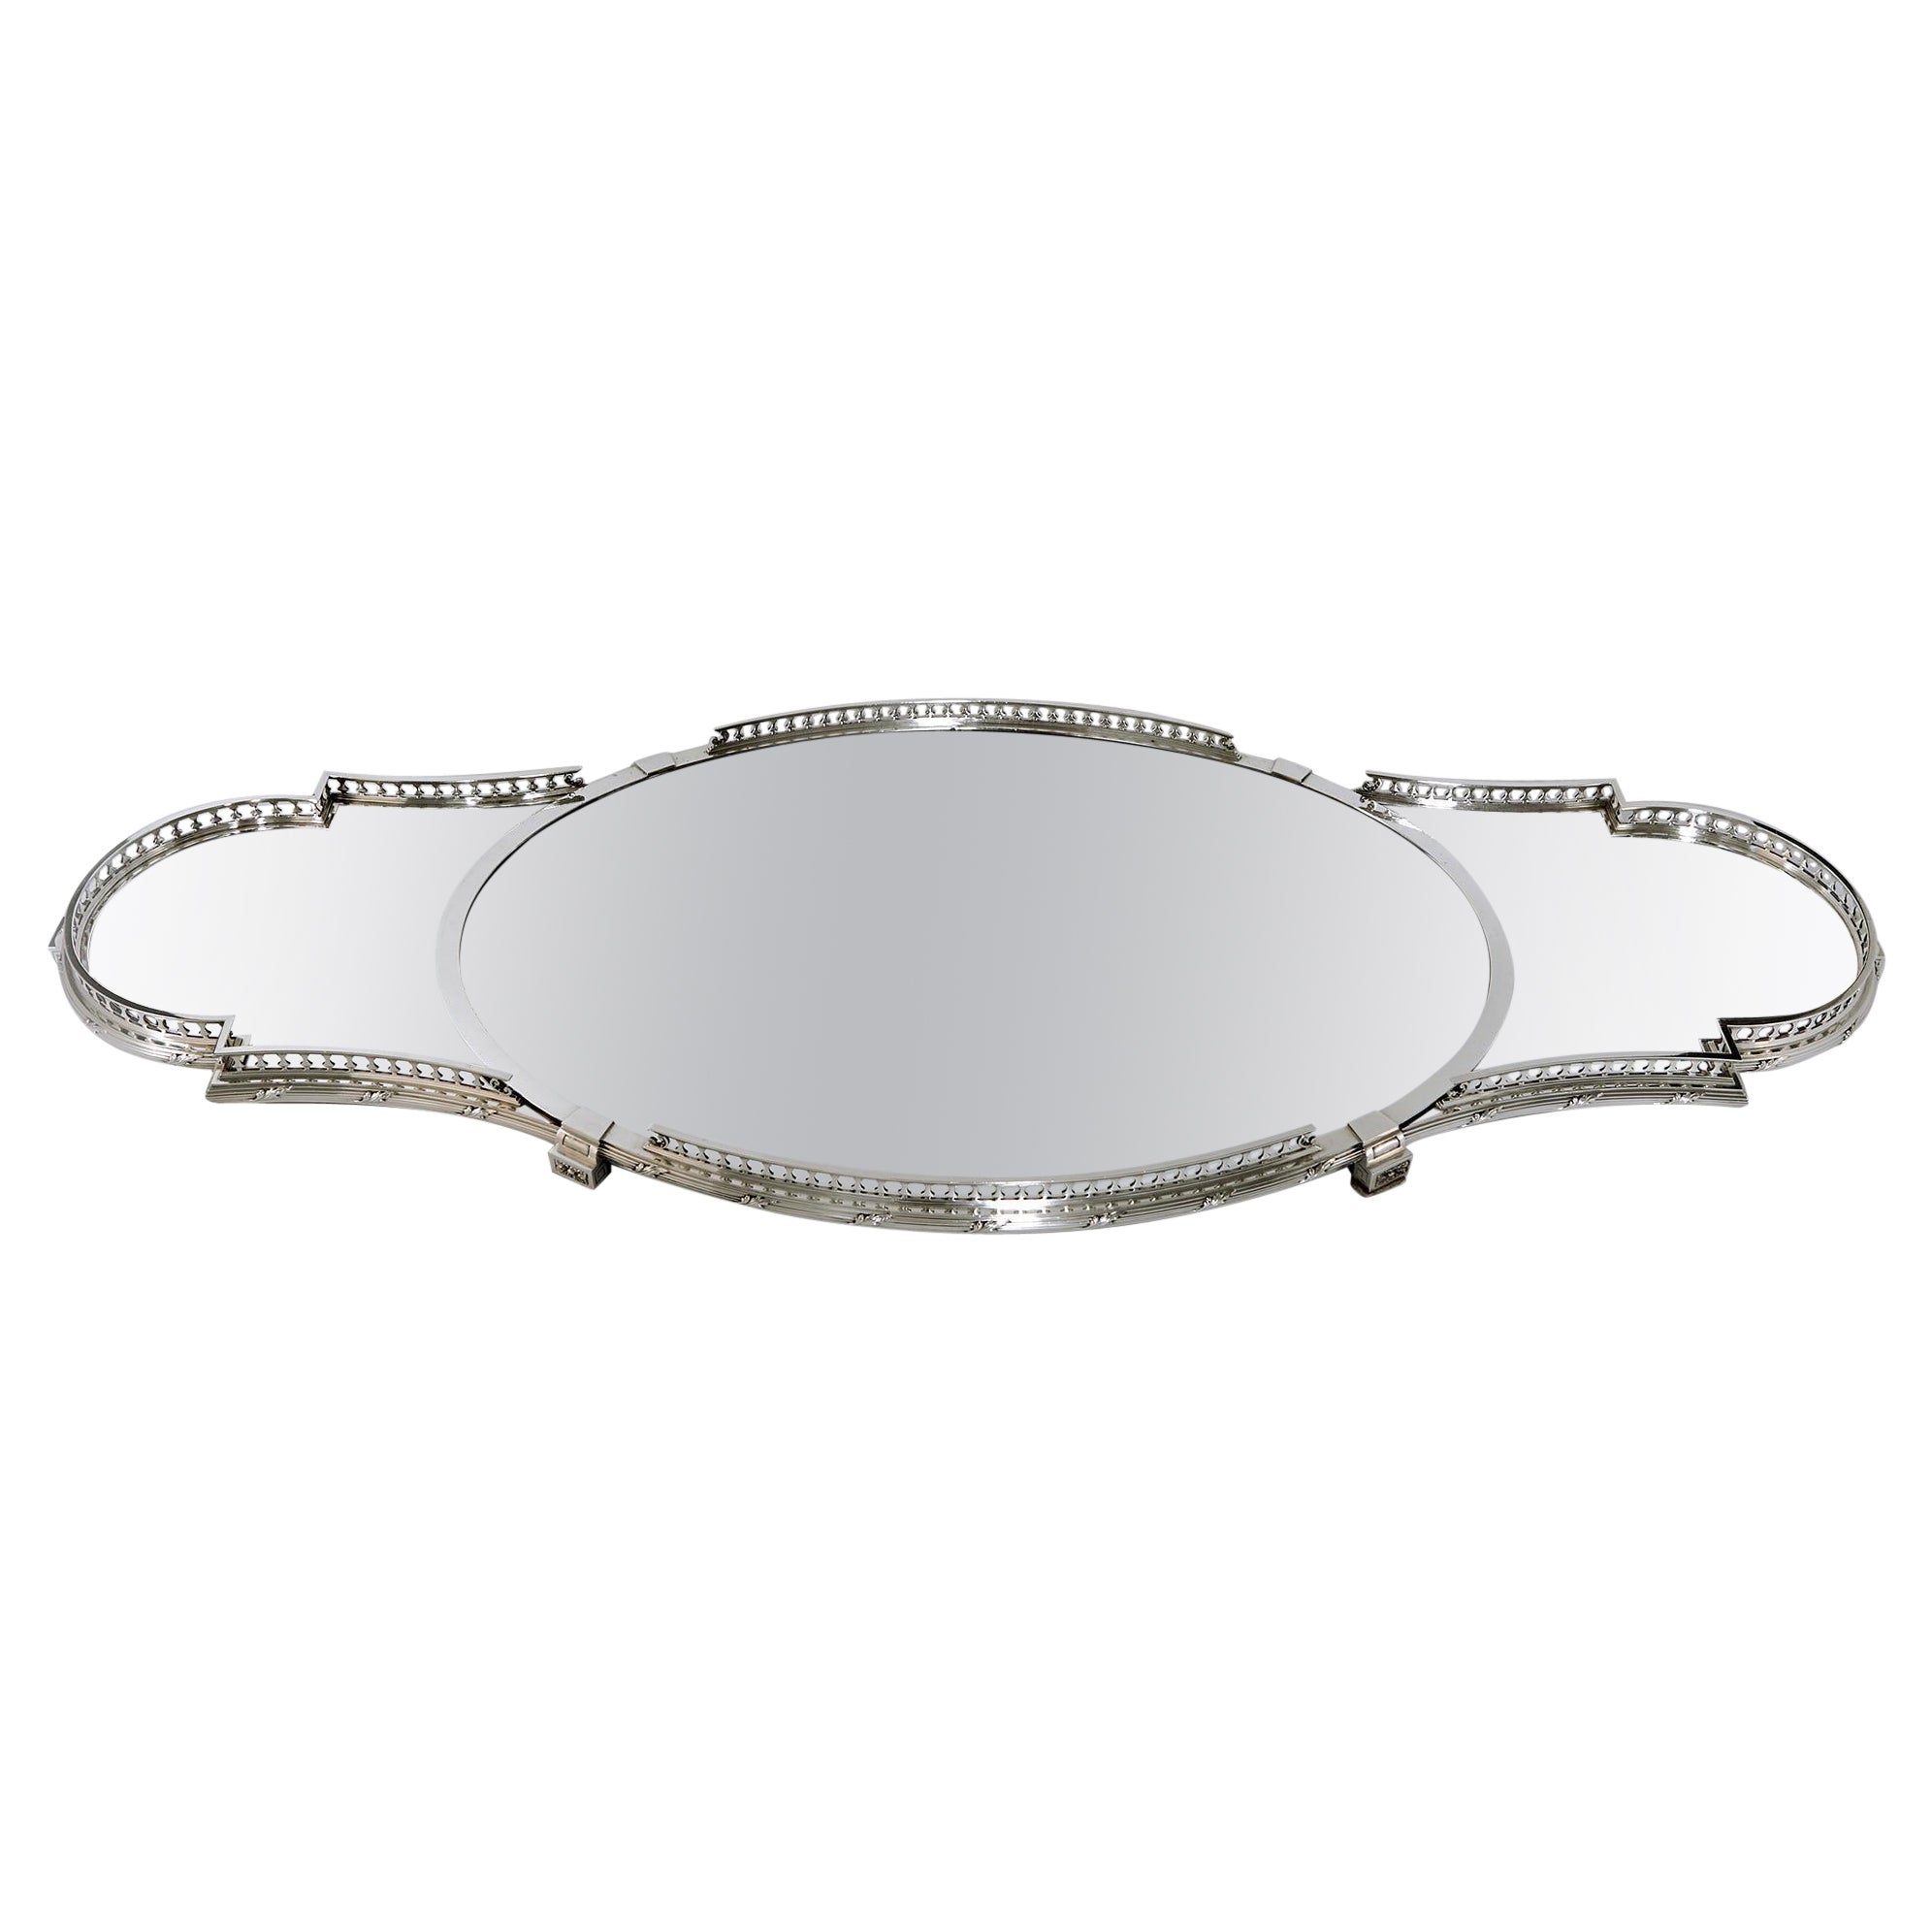 3-Piece Antique French Mirrored Silver Plateau, circa 1900 For Sale